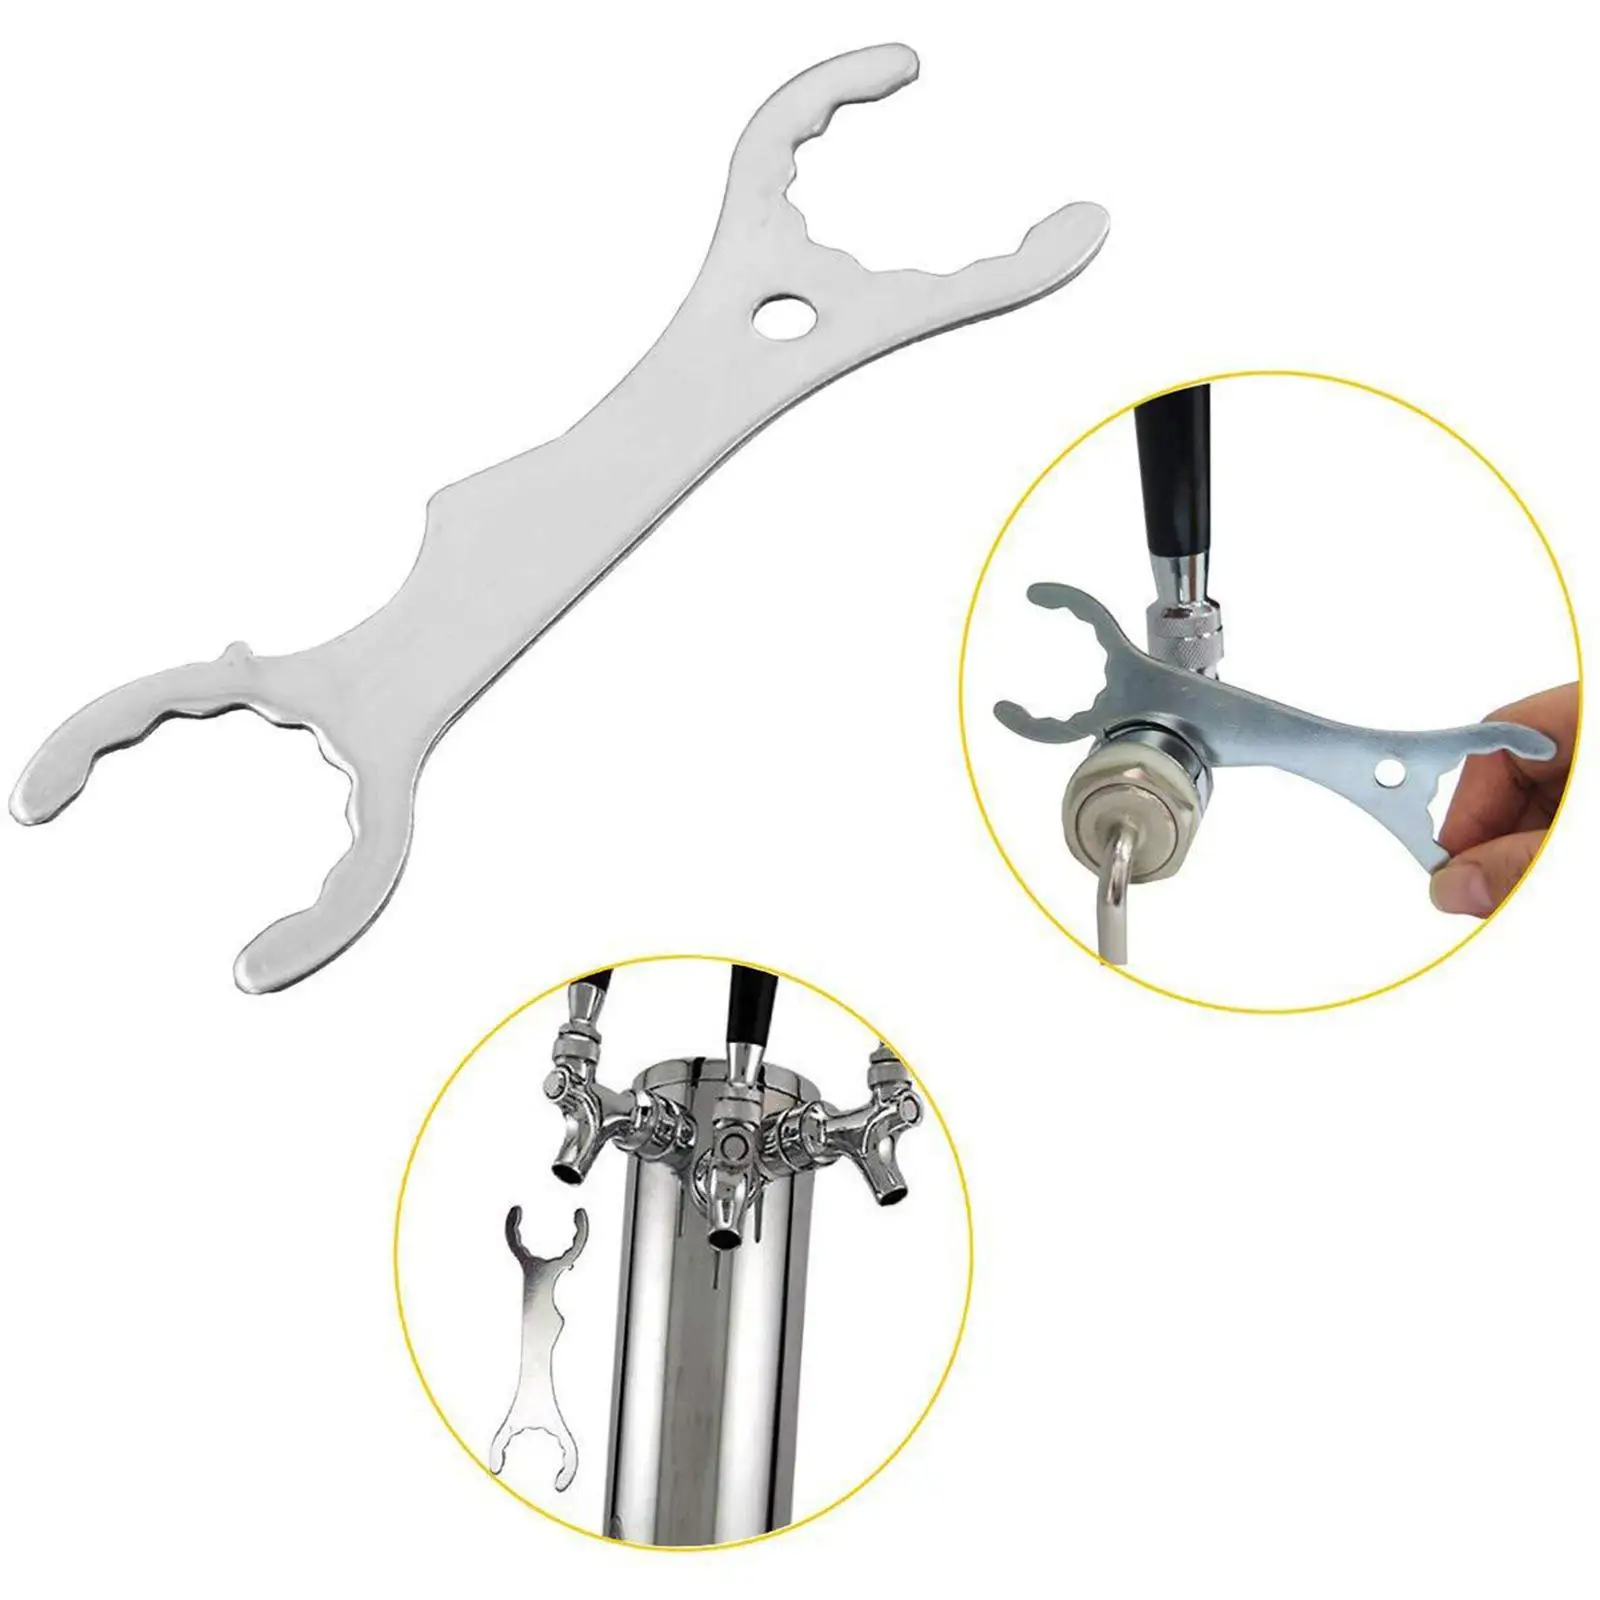 Beer Faucet Wrench Portable Beer Repair Tools Tower Coupler Tools Shank